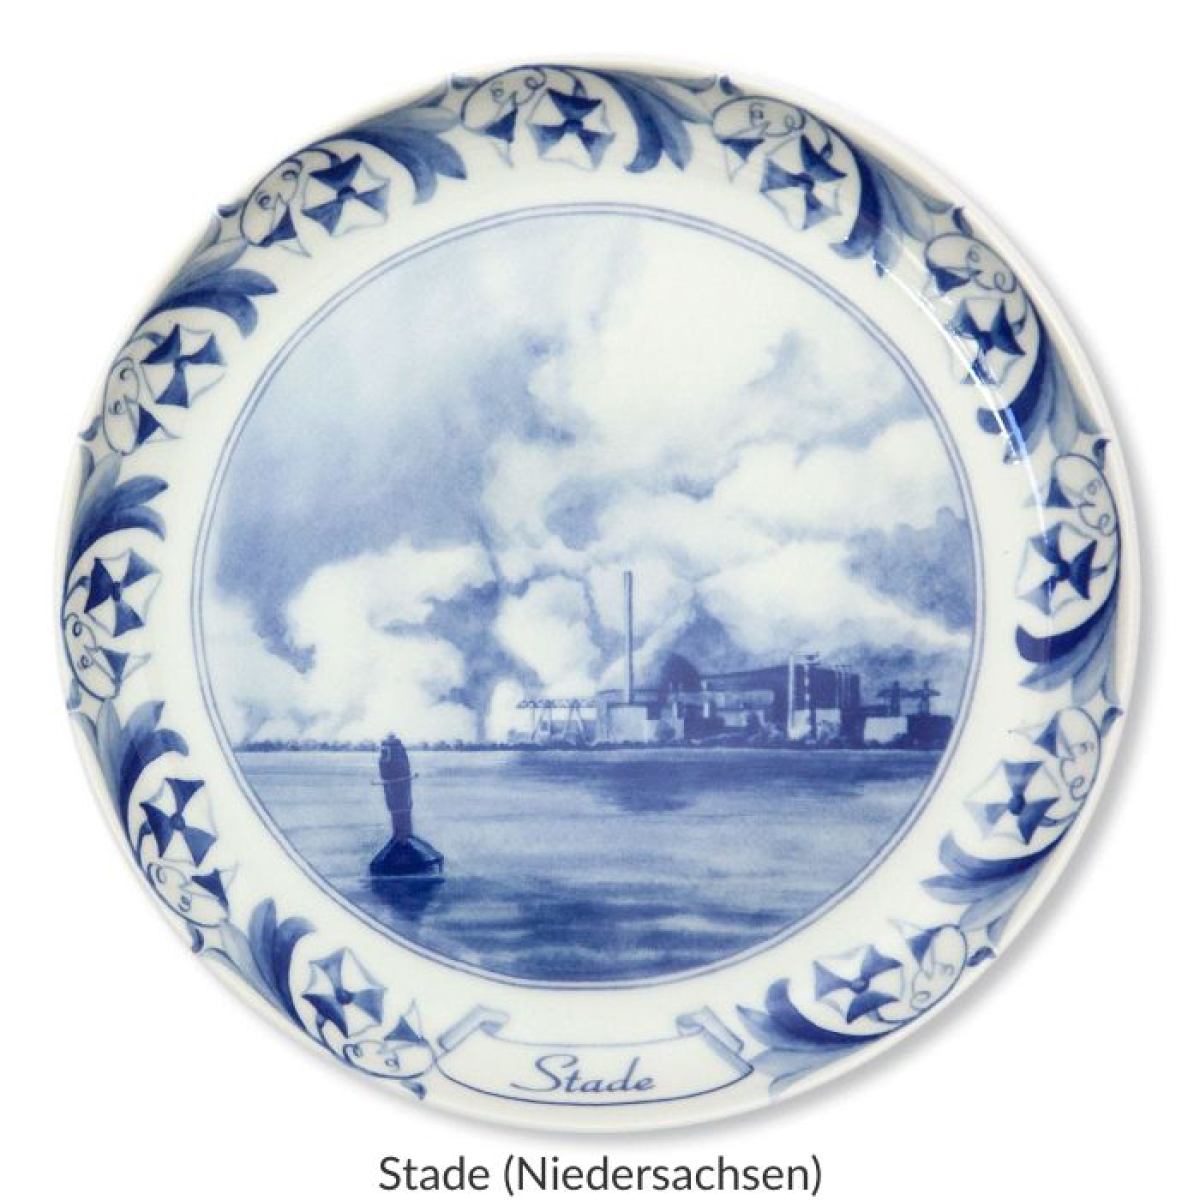 Set of Five Nuclear Plates made of Porcelain